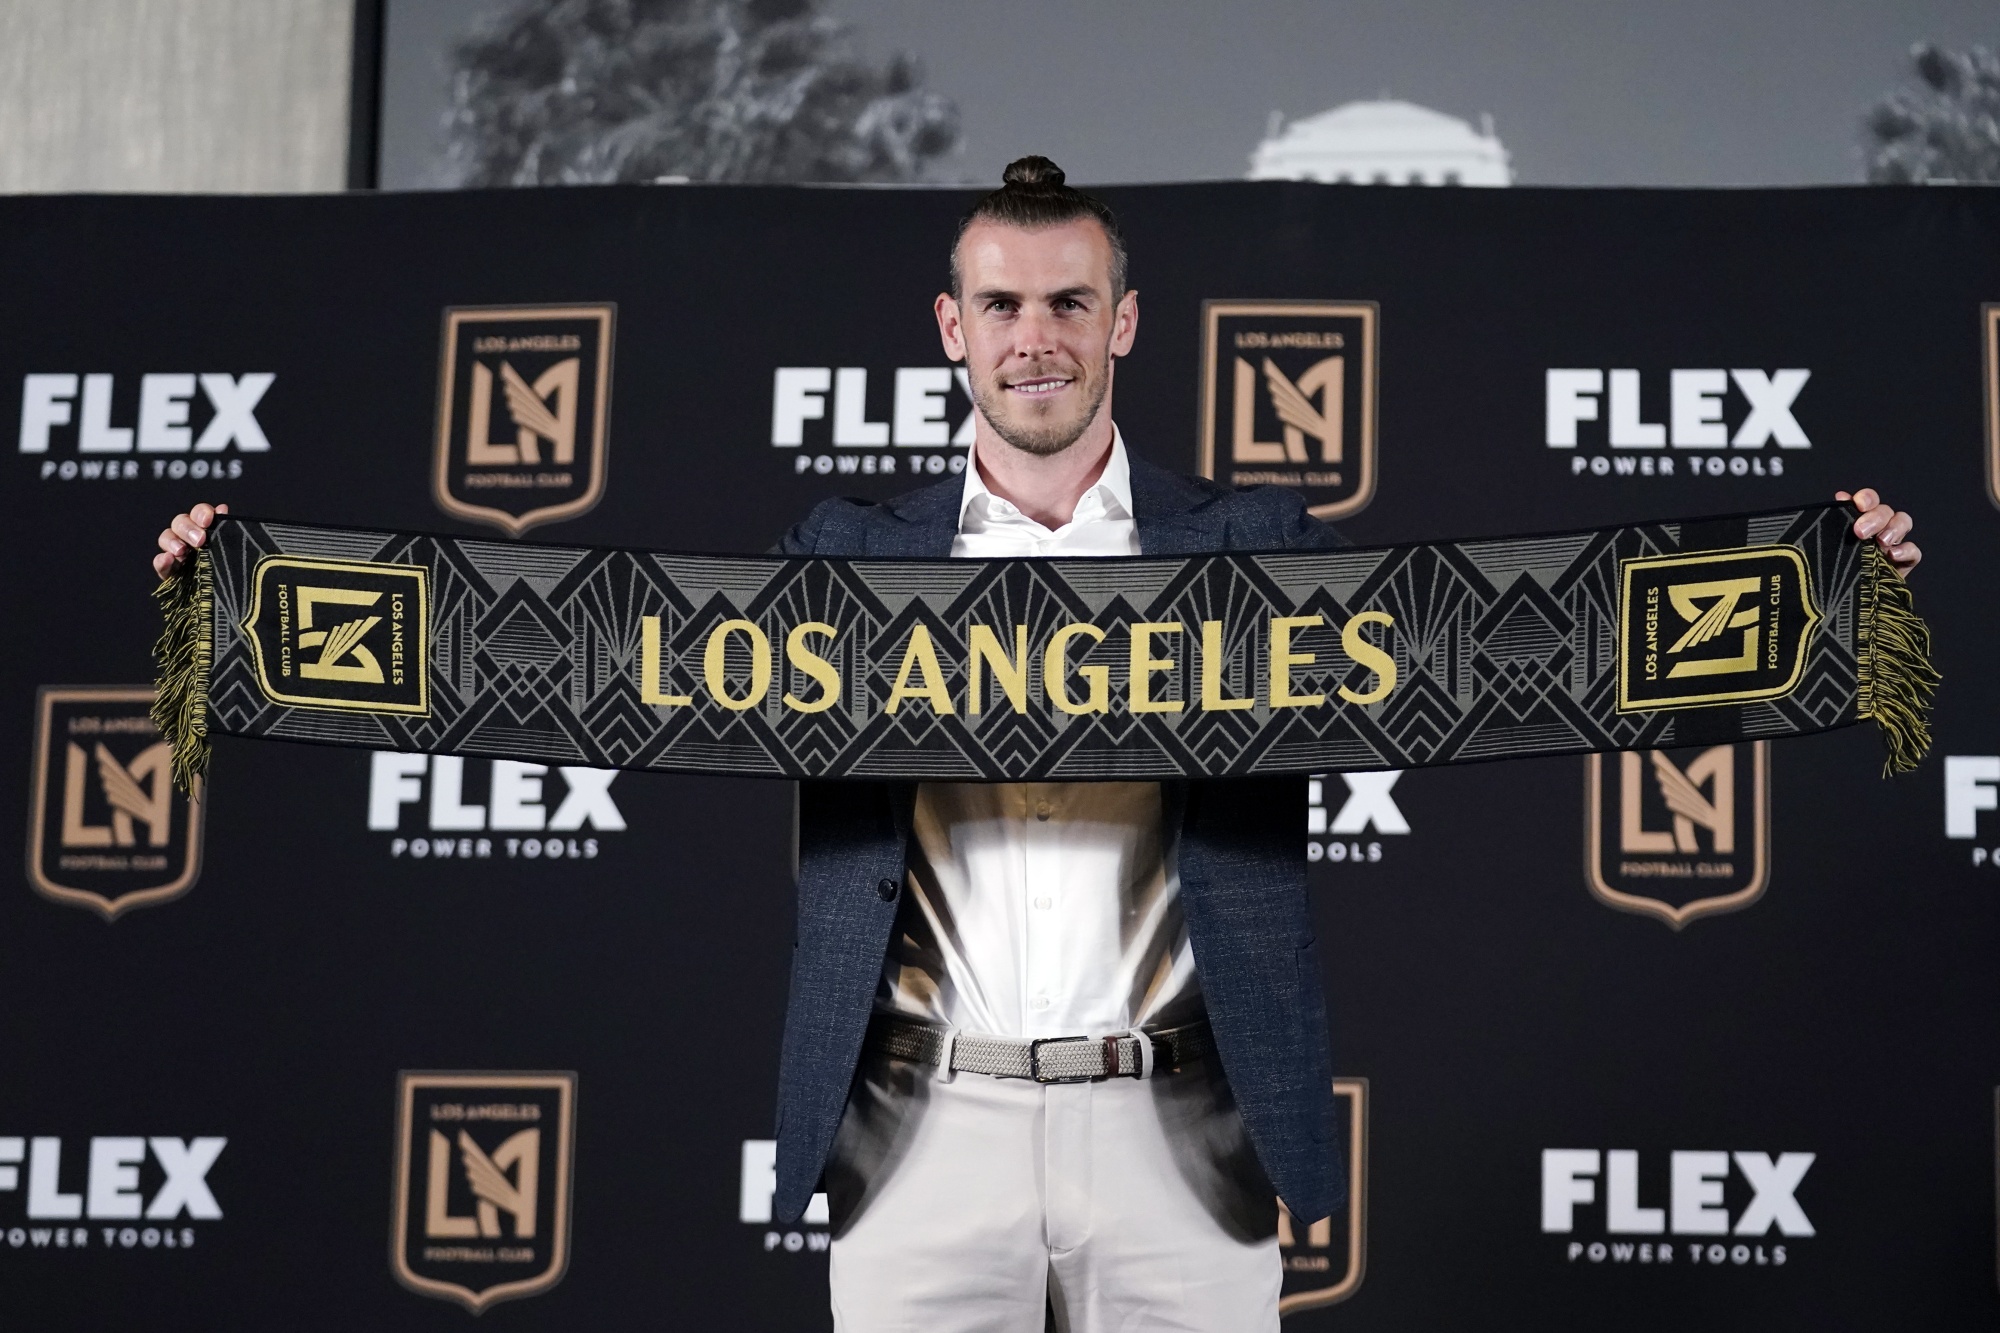 Gareth Bale rescues LAFC after coming off the bench to help clinch